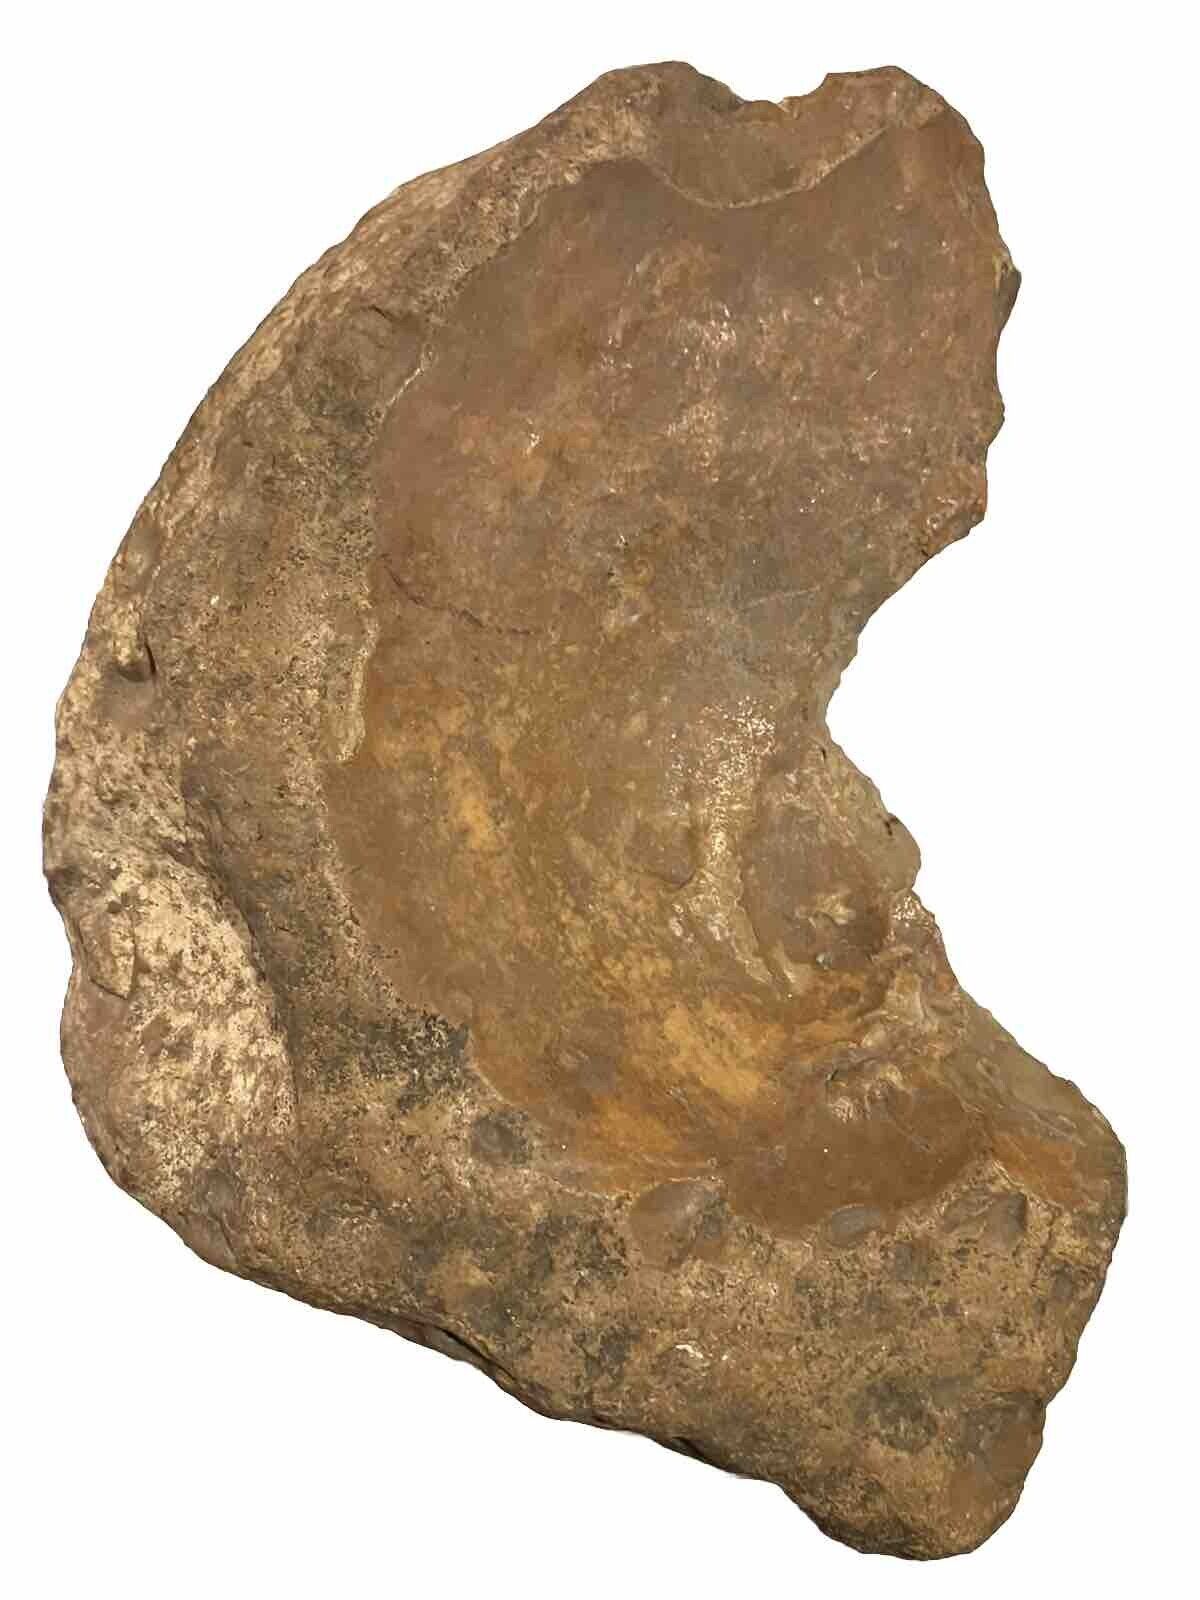 Large 7inch By 5 Inch Prehistoric Neathdrathal Flint Axe Found In Central Texas